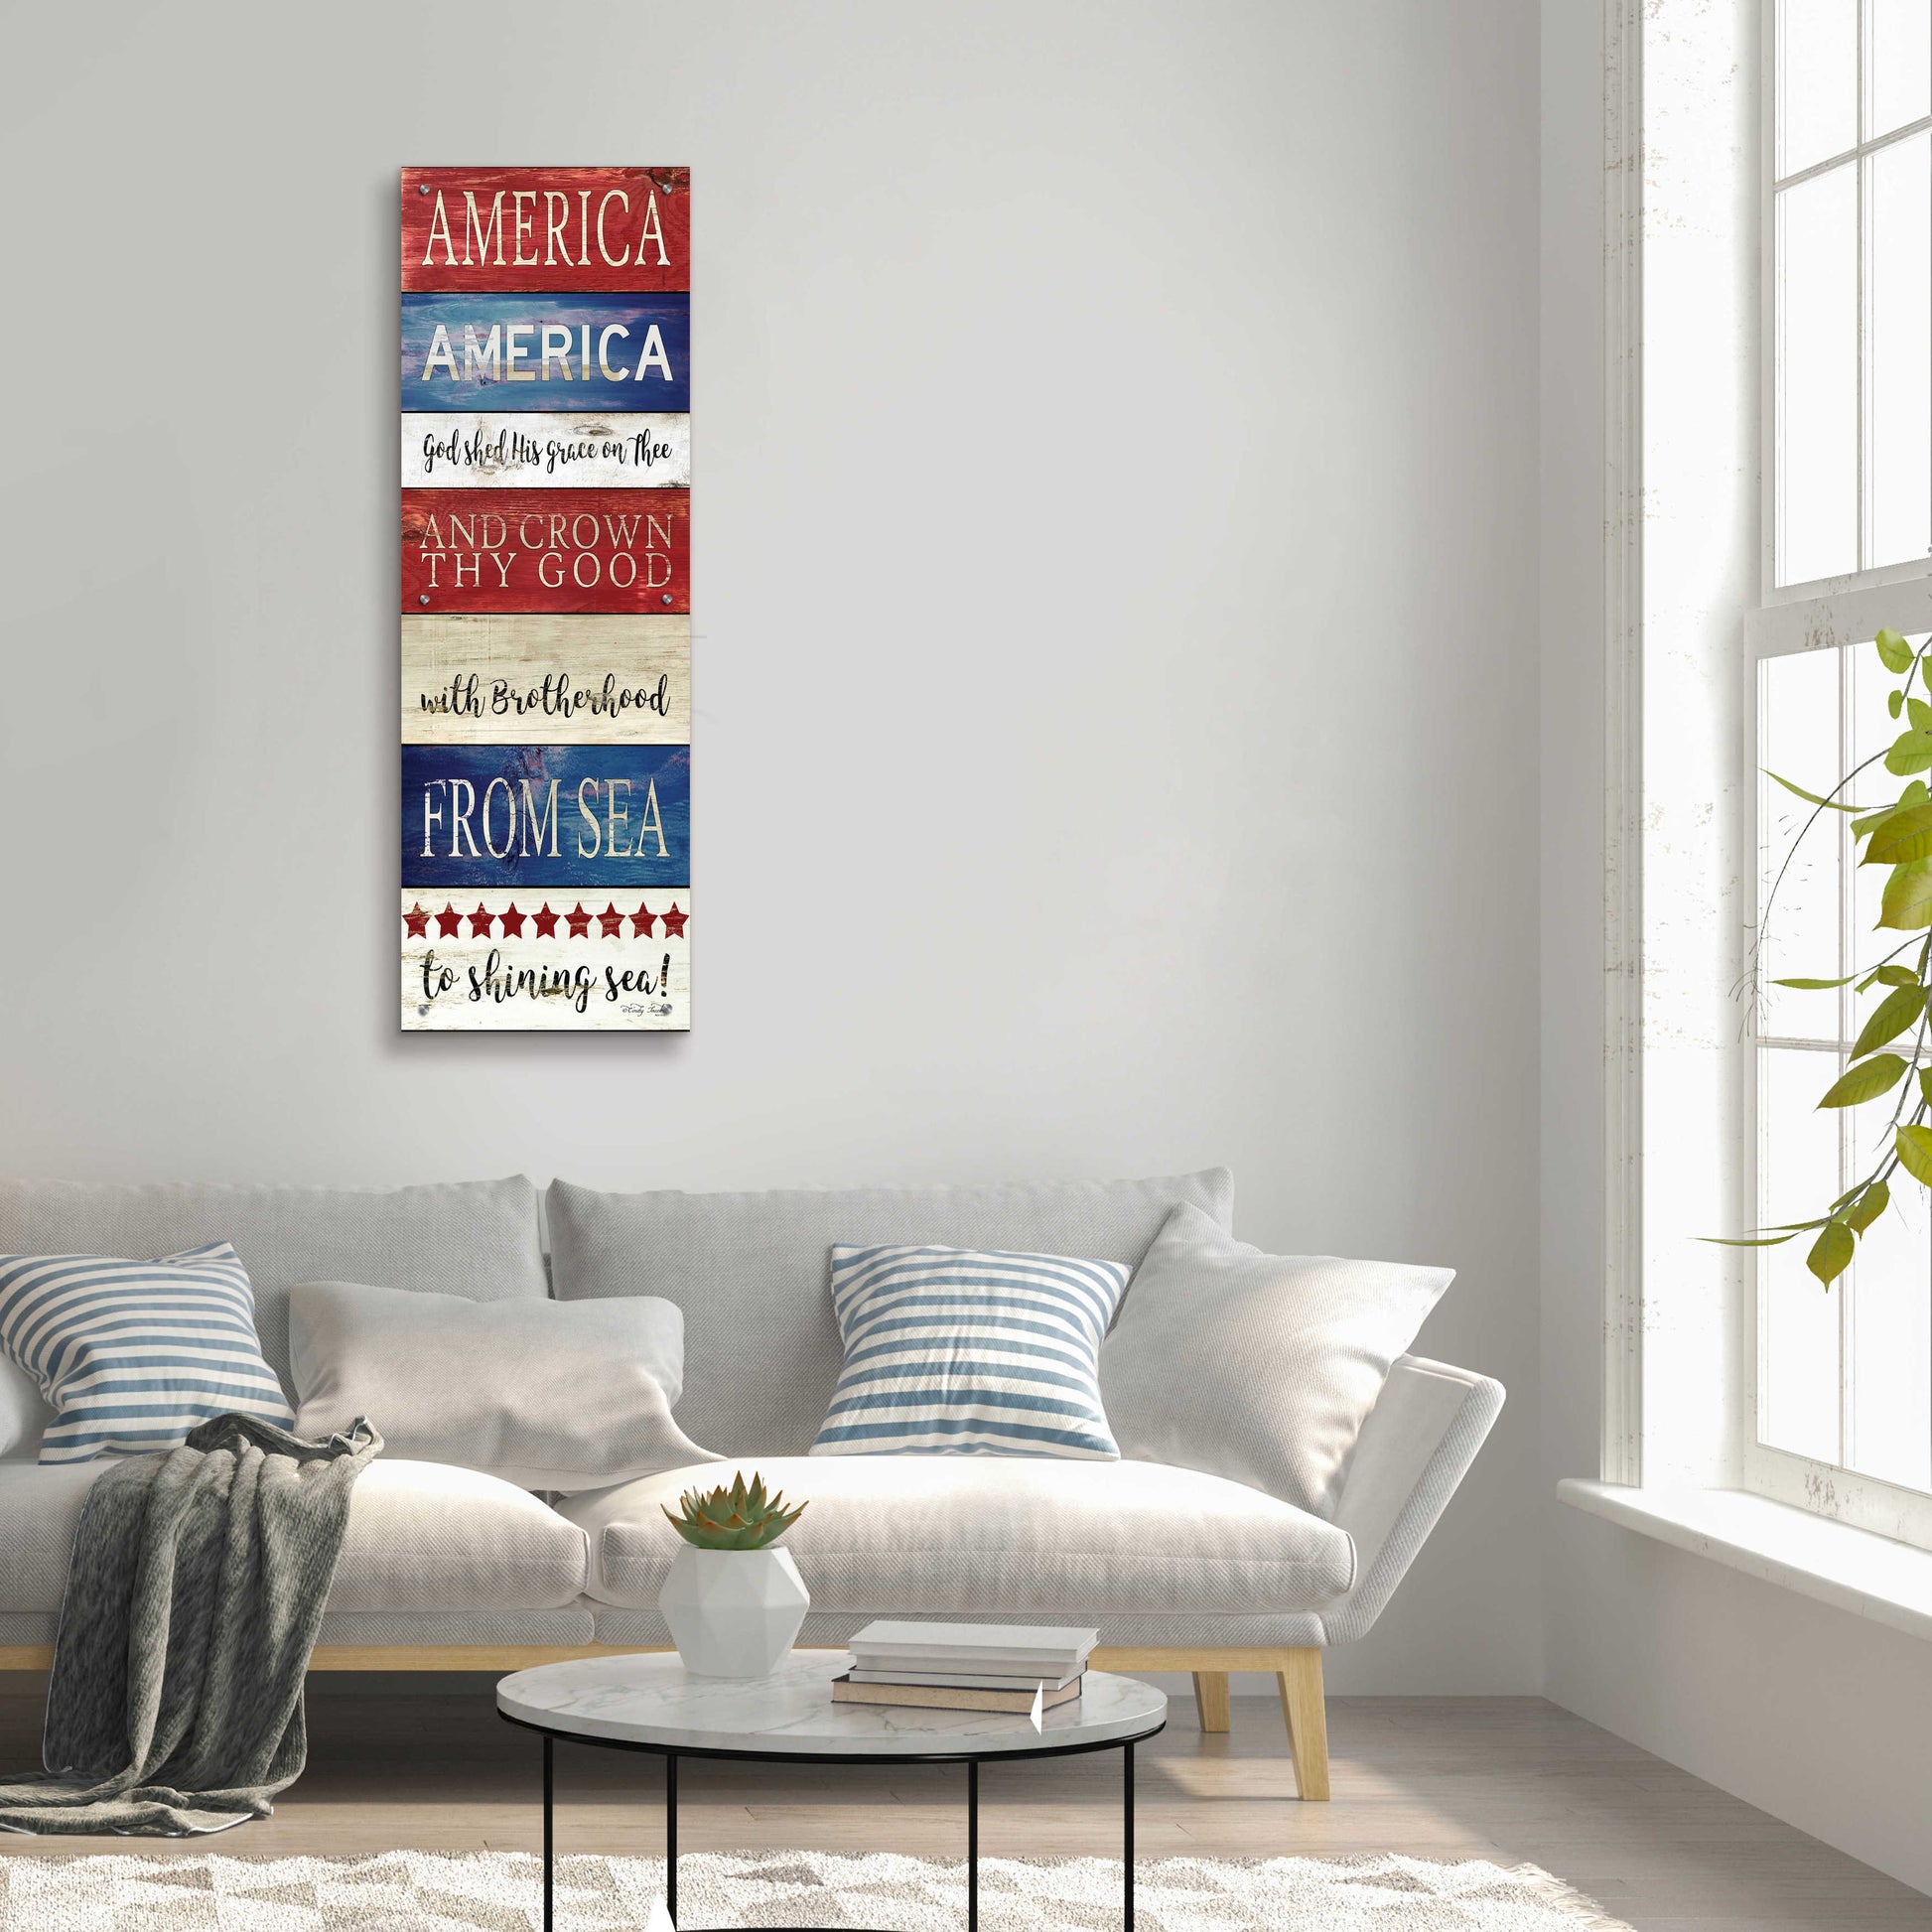 Epic Art 'America God Shed His Grace on Thee' by Cindy Jacobs, Acrylic Glass Wall Art,16x48